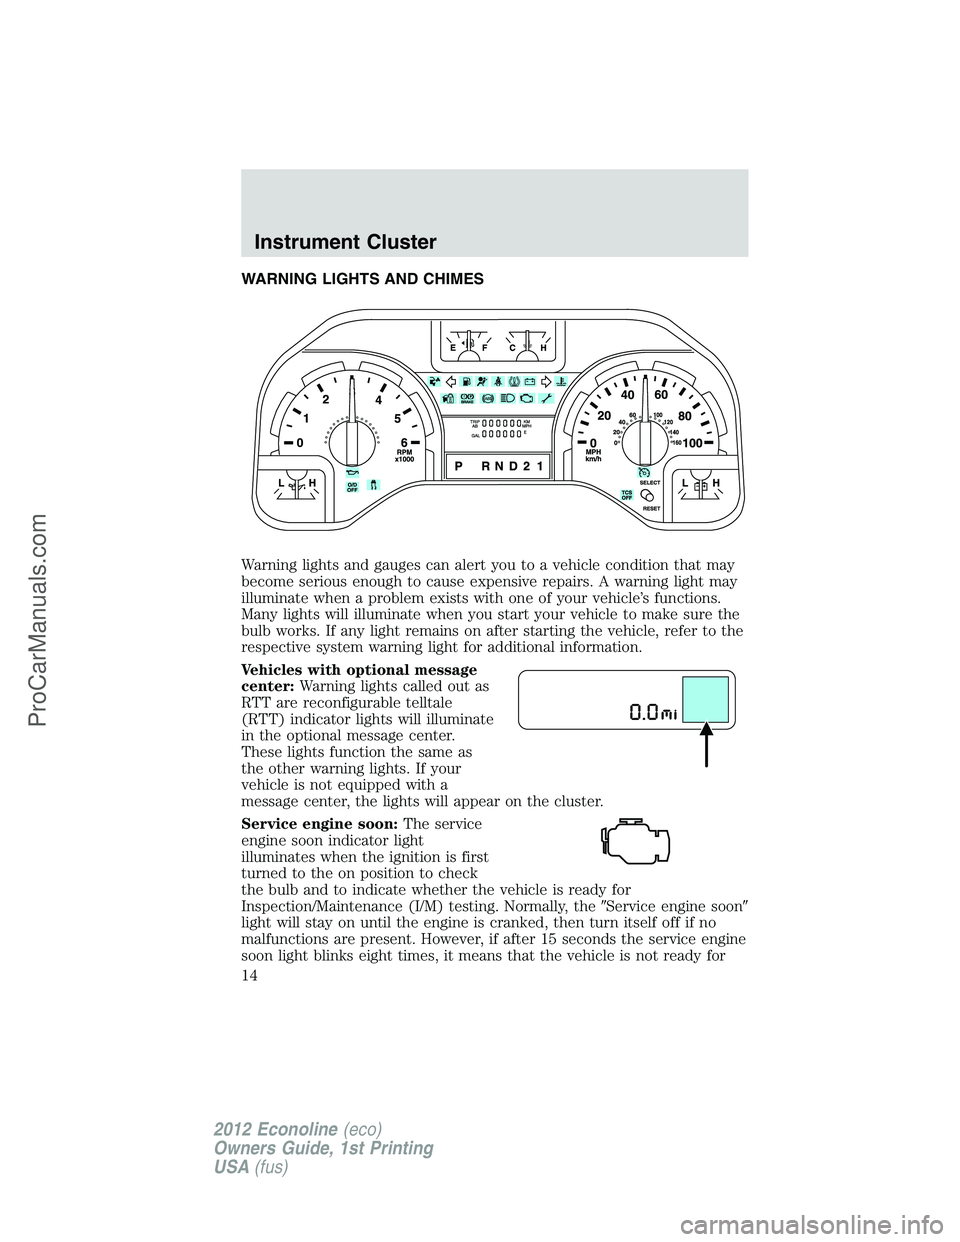 FORD E-250 2012  Owners Manual WARNING LIGHTS AND CHIMES
Warning lights and gauges can alert you to a vehicle condition that may
become serious enough to cause expensive repairs. A warning light may
illuminate when a problem exists